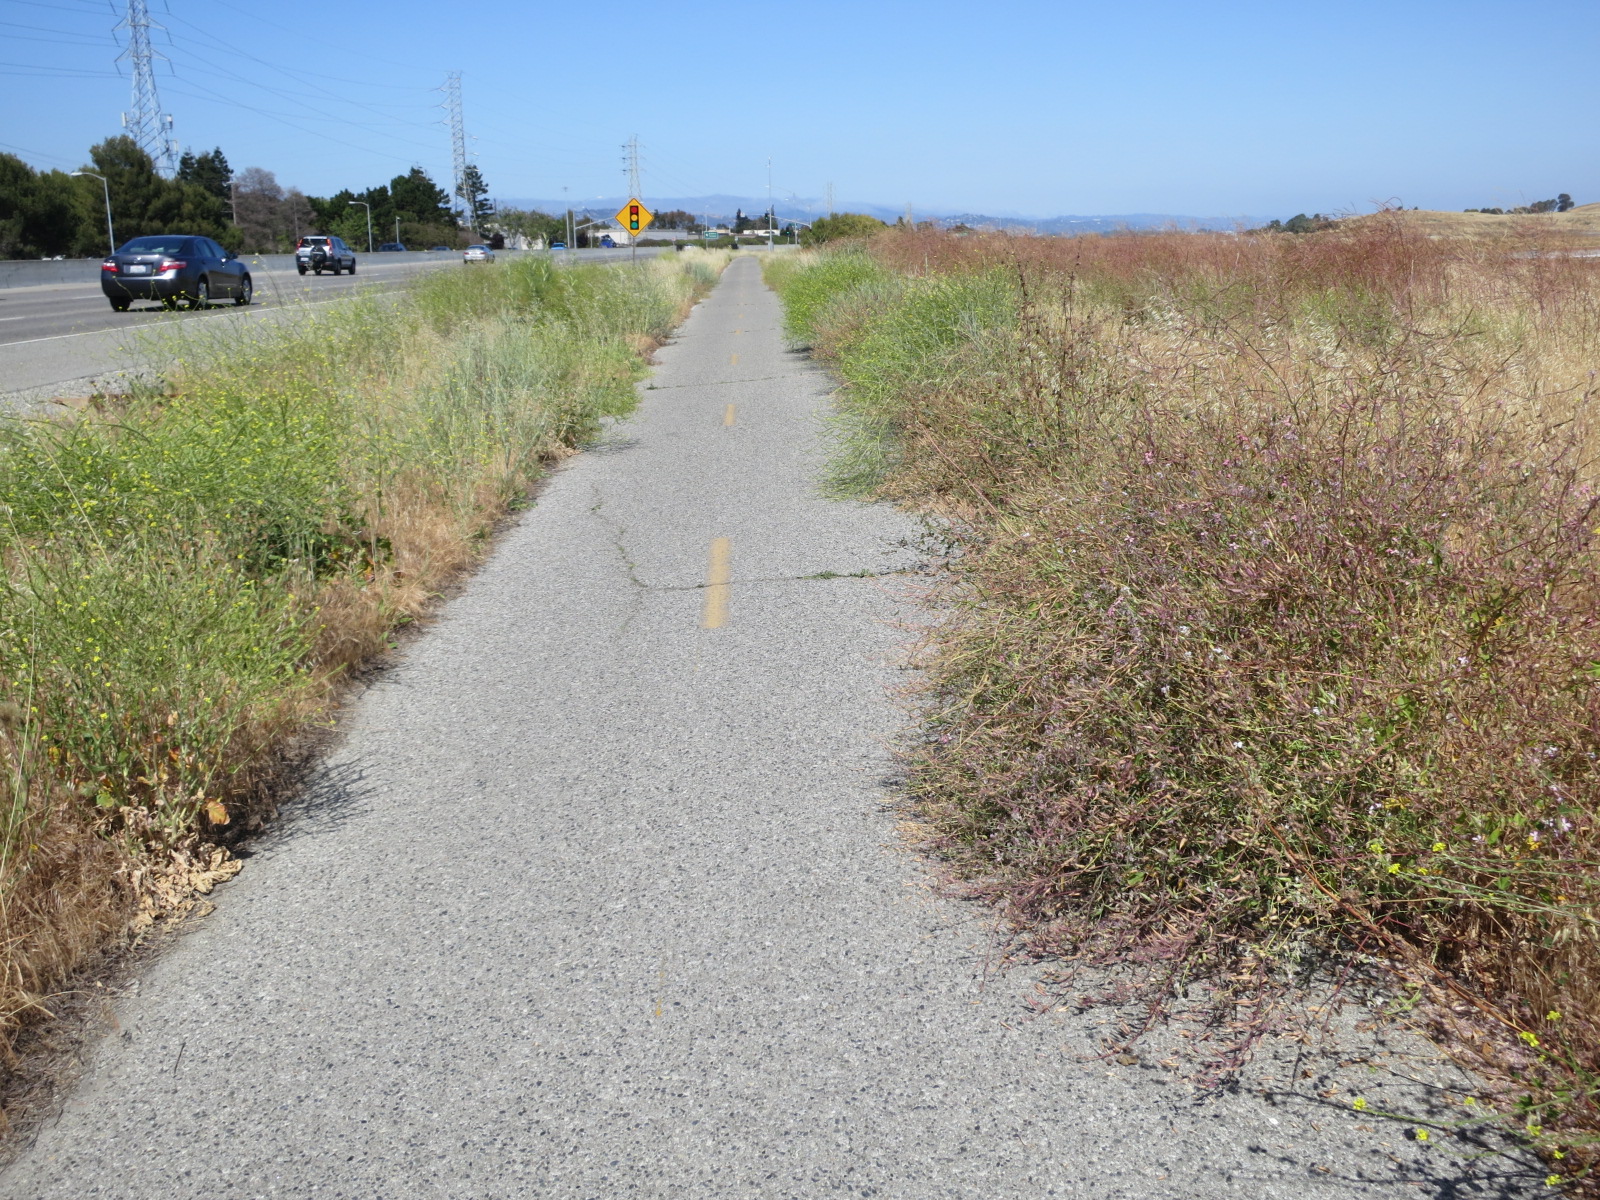 Weeds overgrowing the Bay Trail in Menlo Park